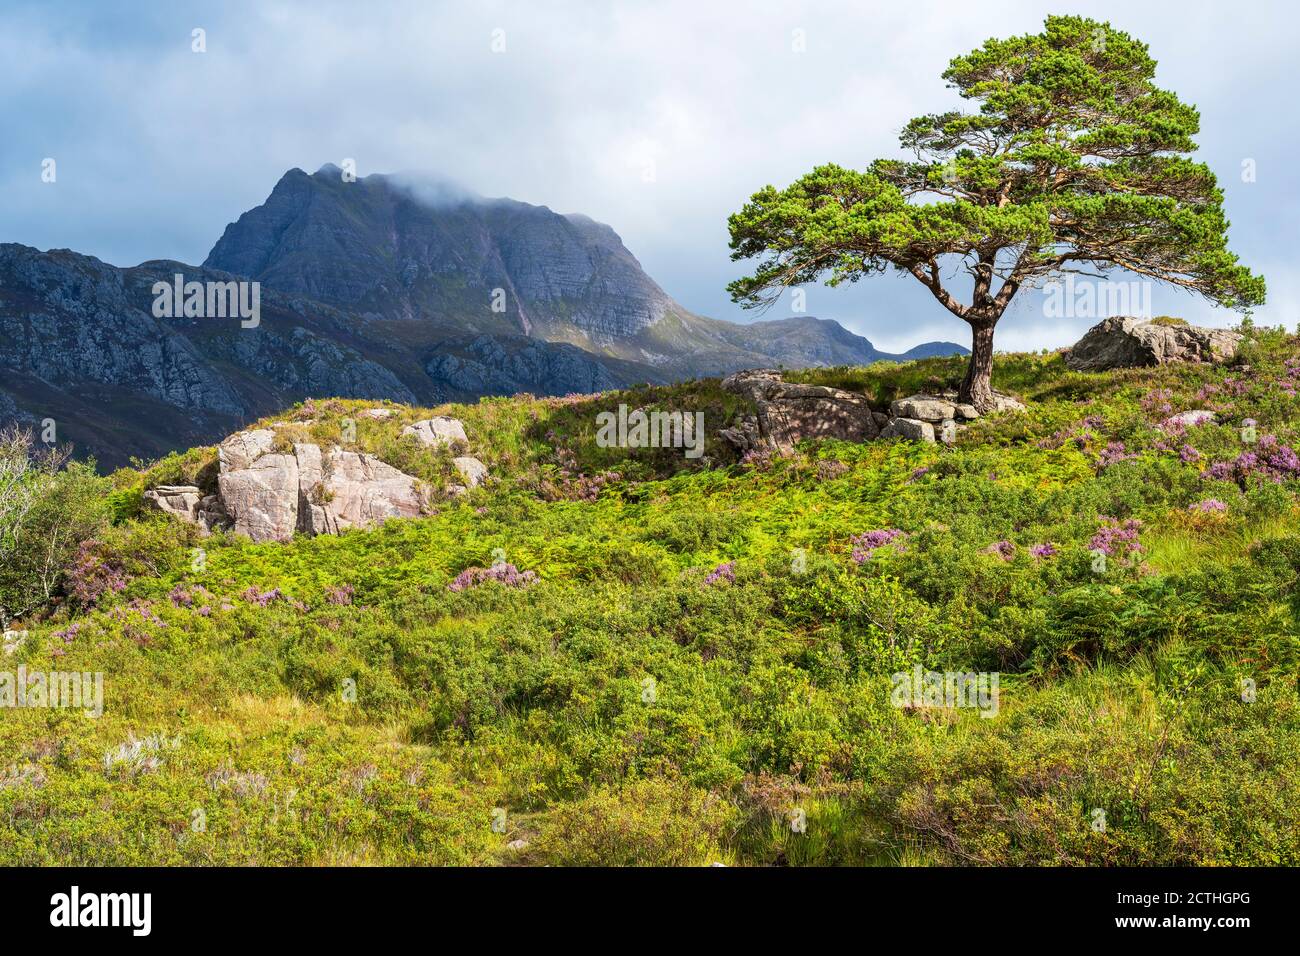 Lone Scots pine on hilltop overlooking Loch Maree with rugged crag of Slioch in distance – Loch Maree, Wester Ross, Highland Region, Scotland, UK Stock Photo